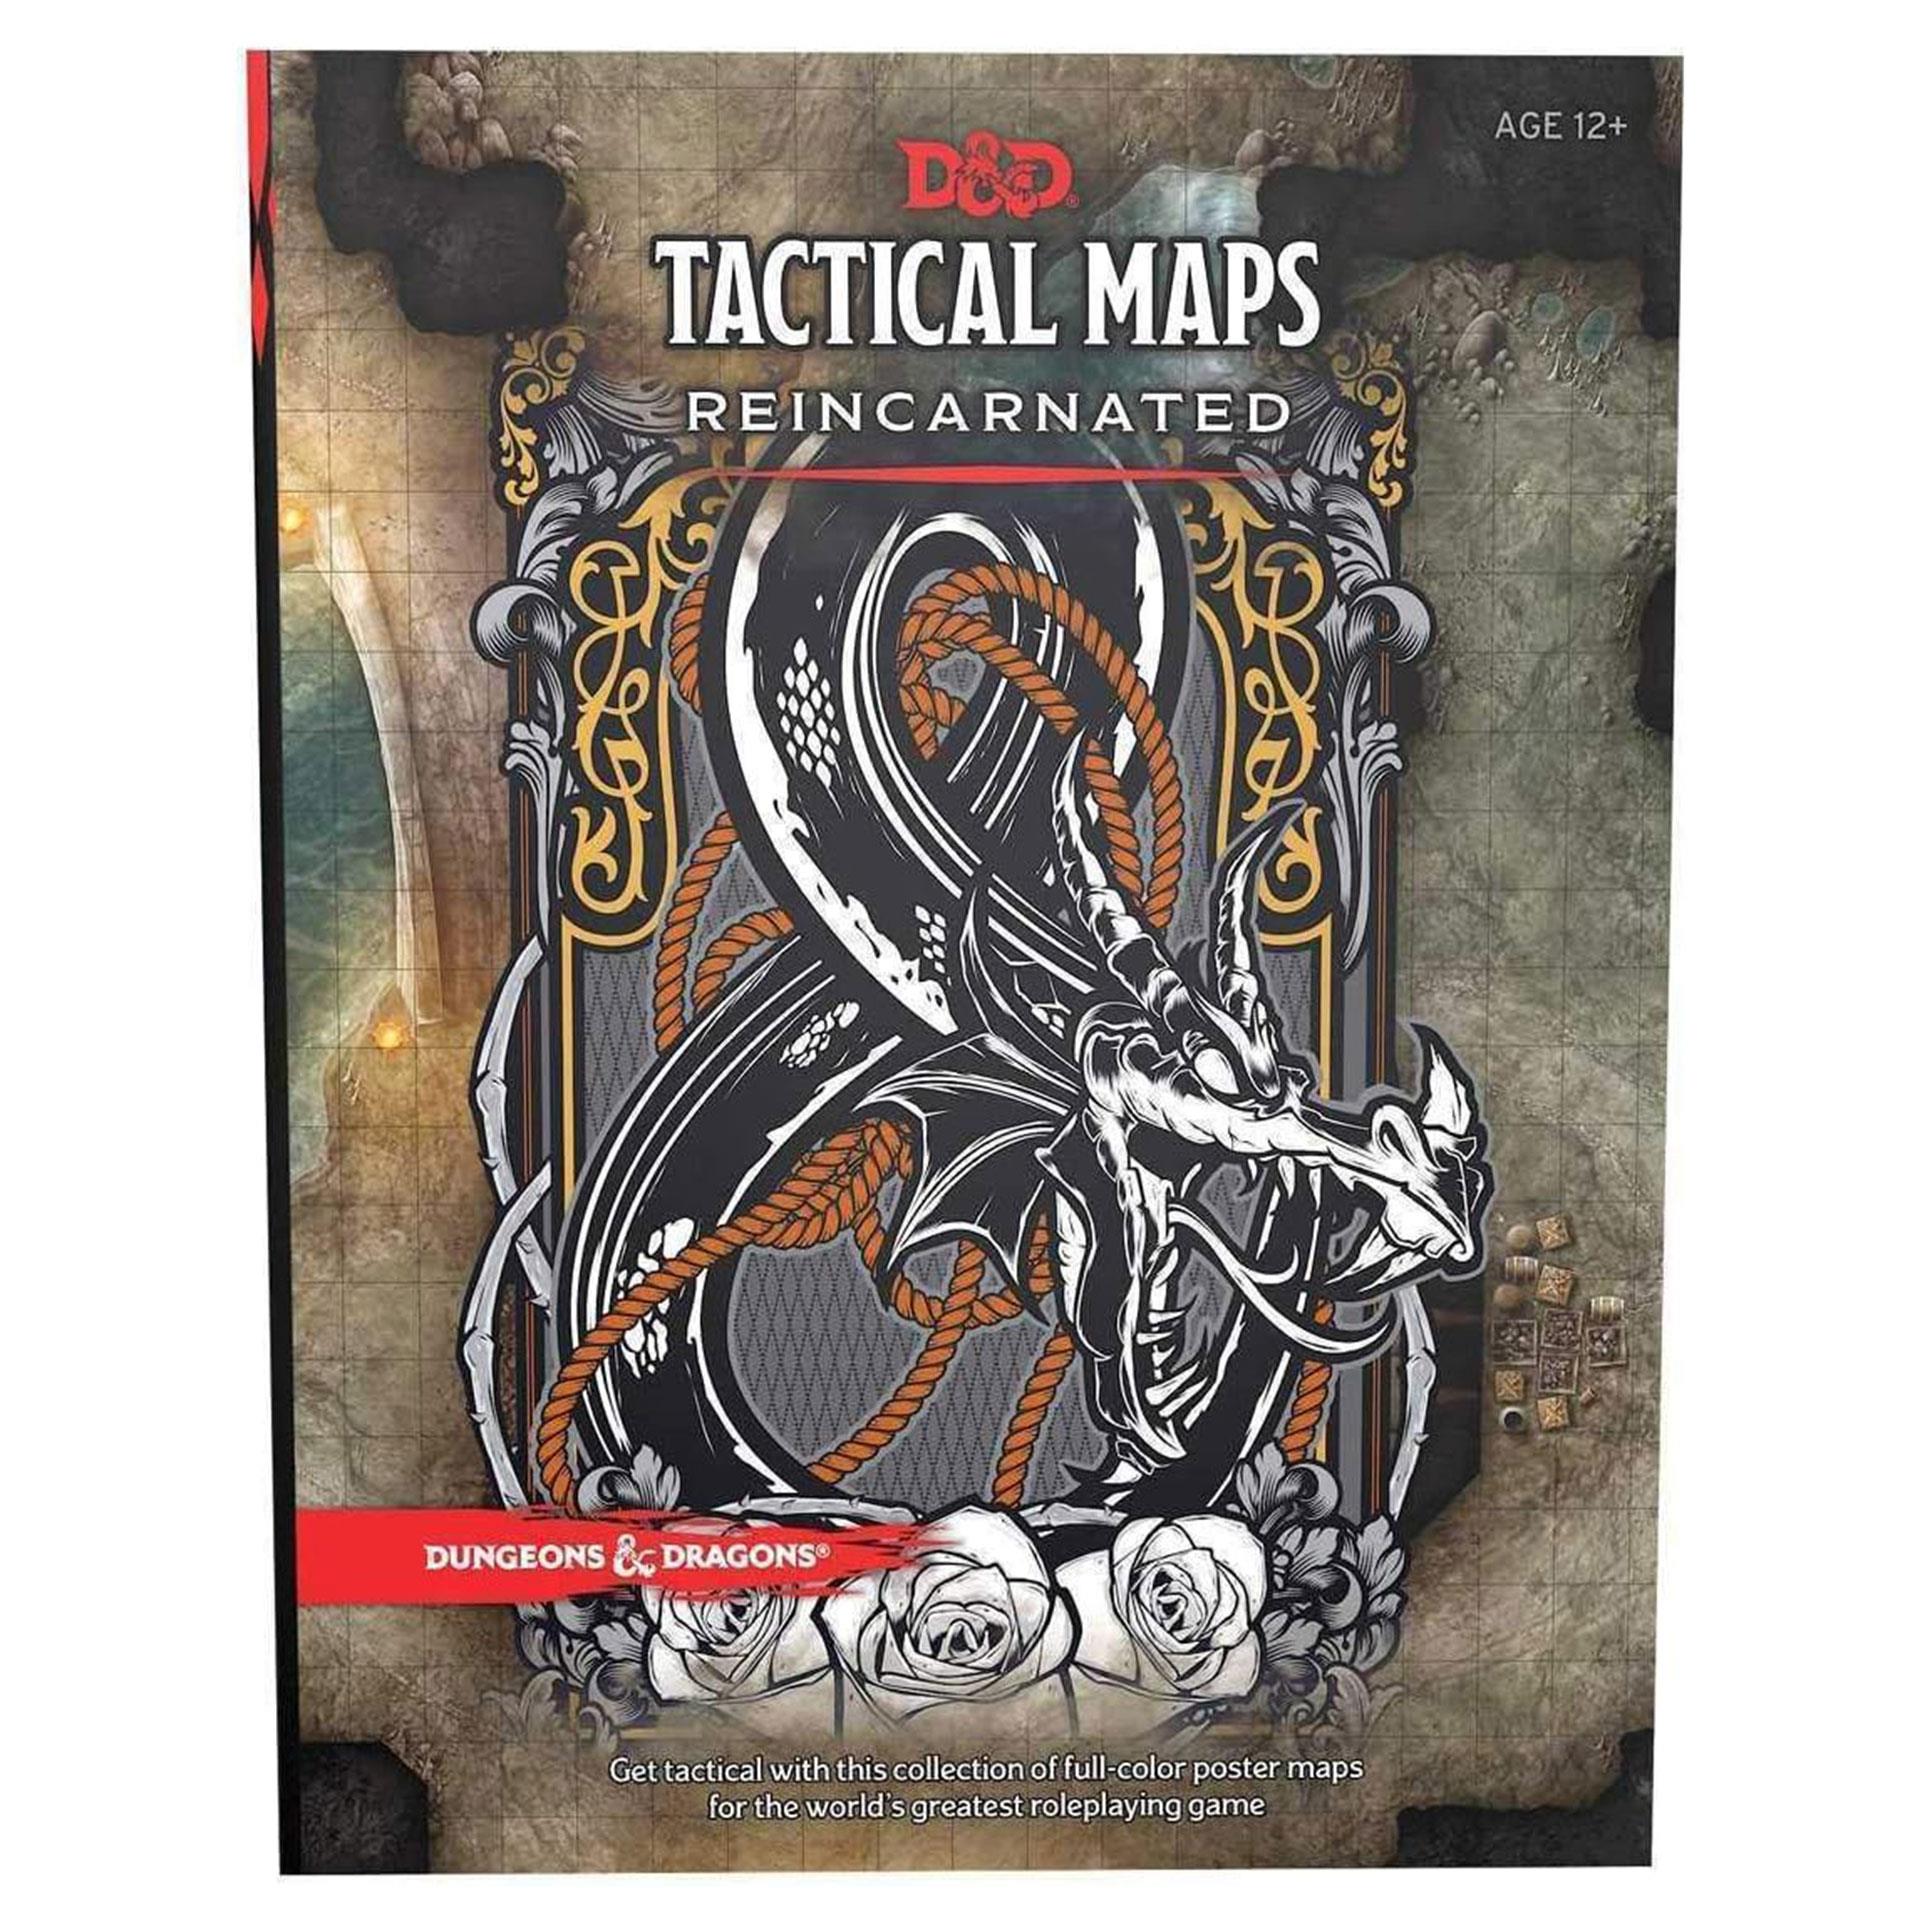 Dungeons & Dragons – Tactical Maps Reincarneted